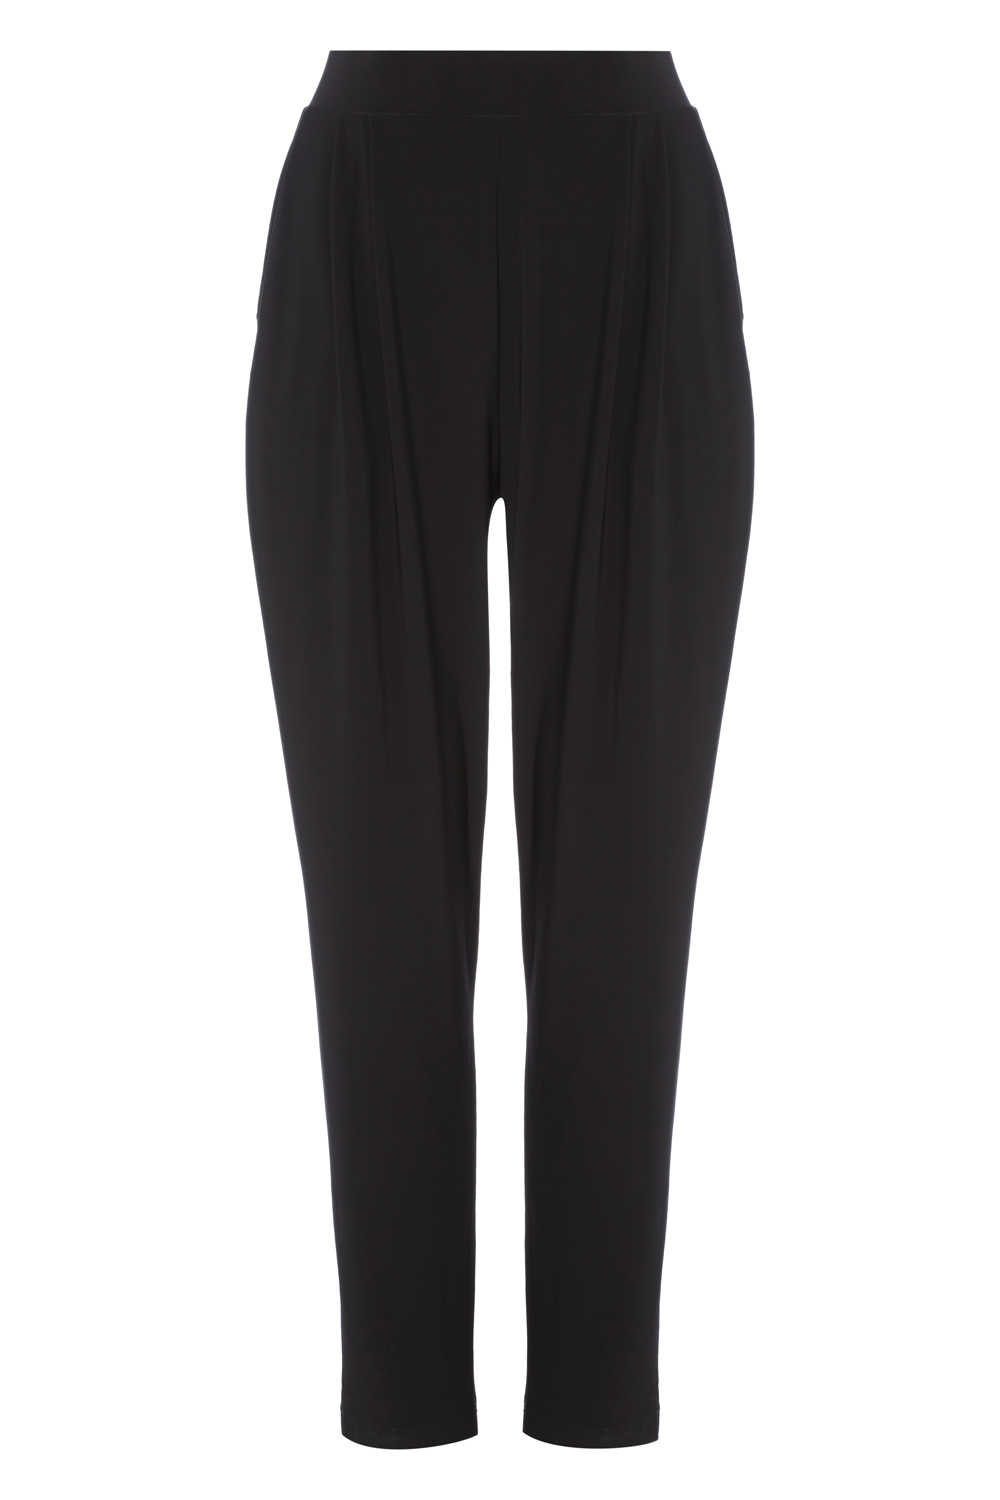 Black Jersey Harem Trousers, Image 3 of 5